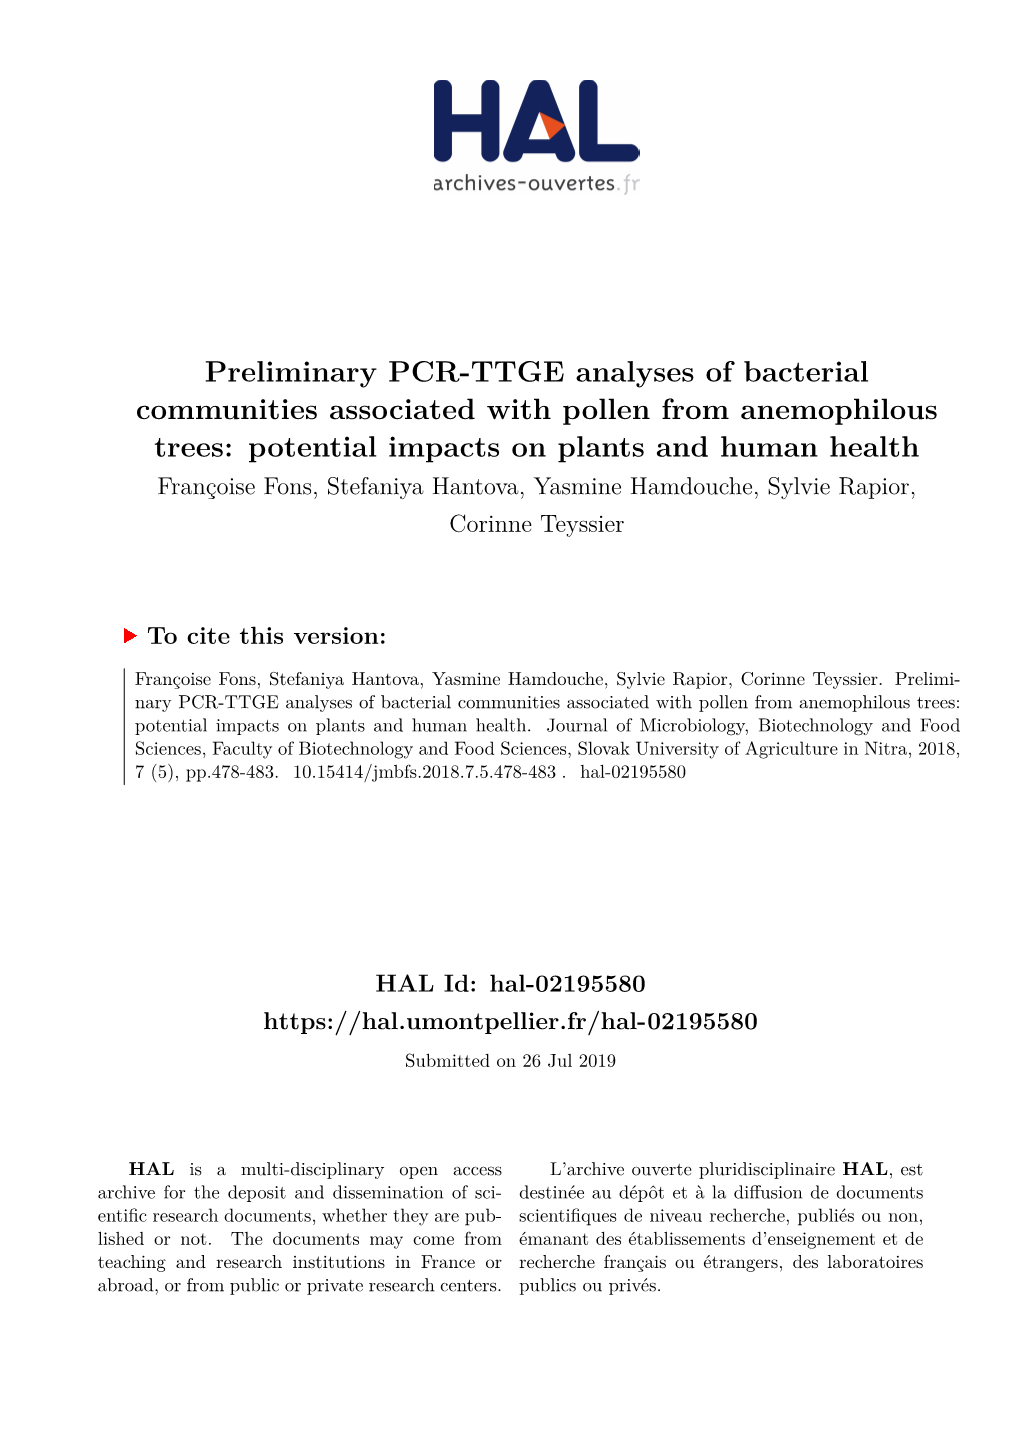 Preliminary PCR-TTGE Analyses of Bacterial Communities Associated